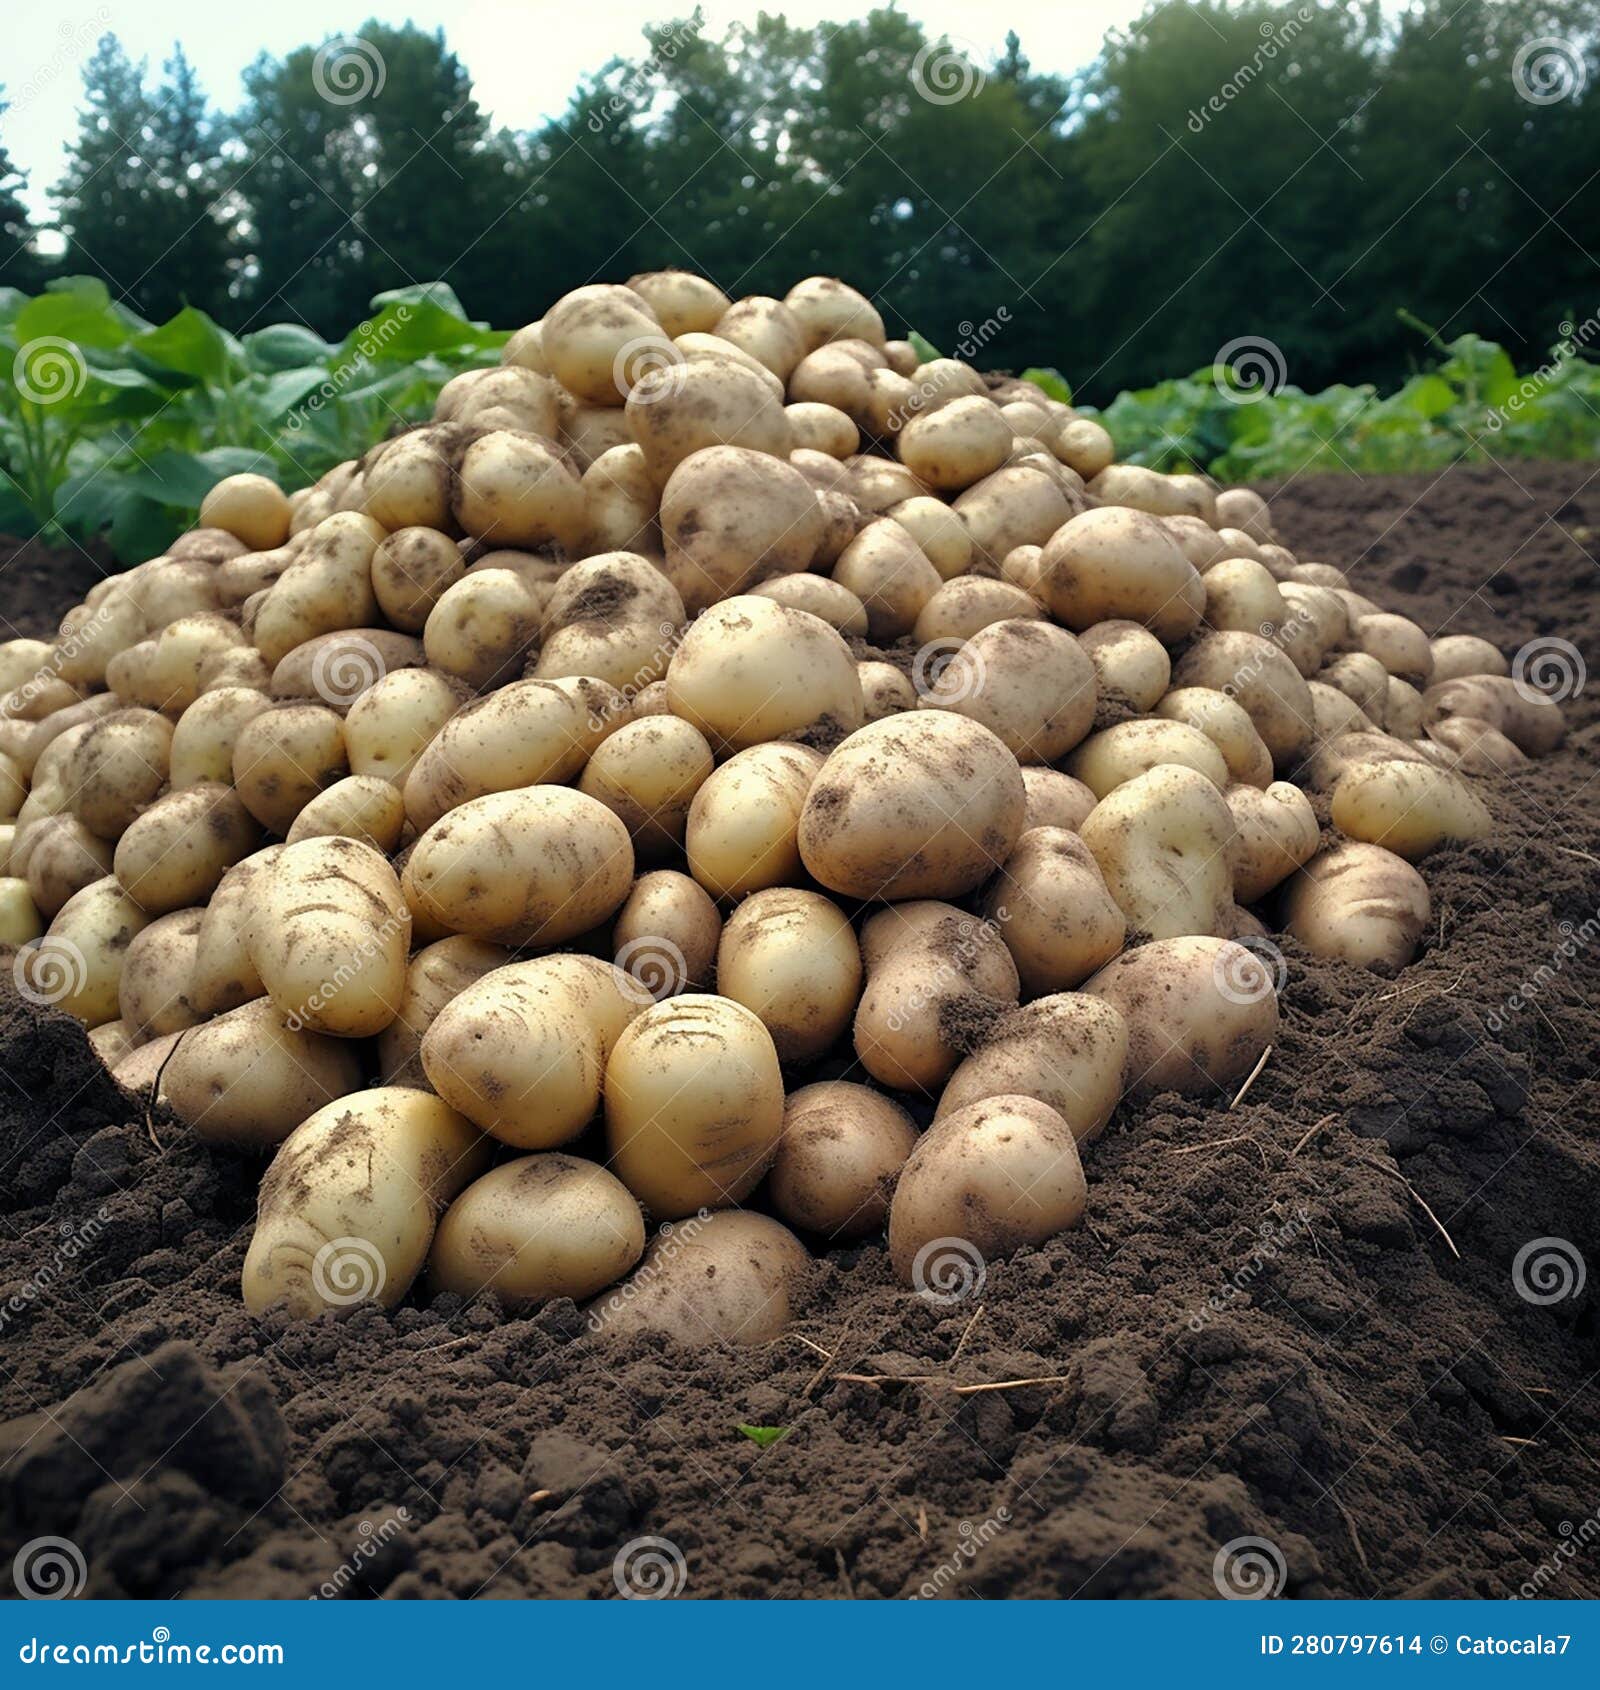 lot, mountain of potato tubers on ground, good harvest, agriculture, for advertising seeds